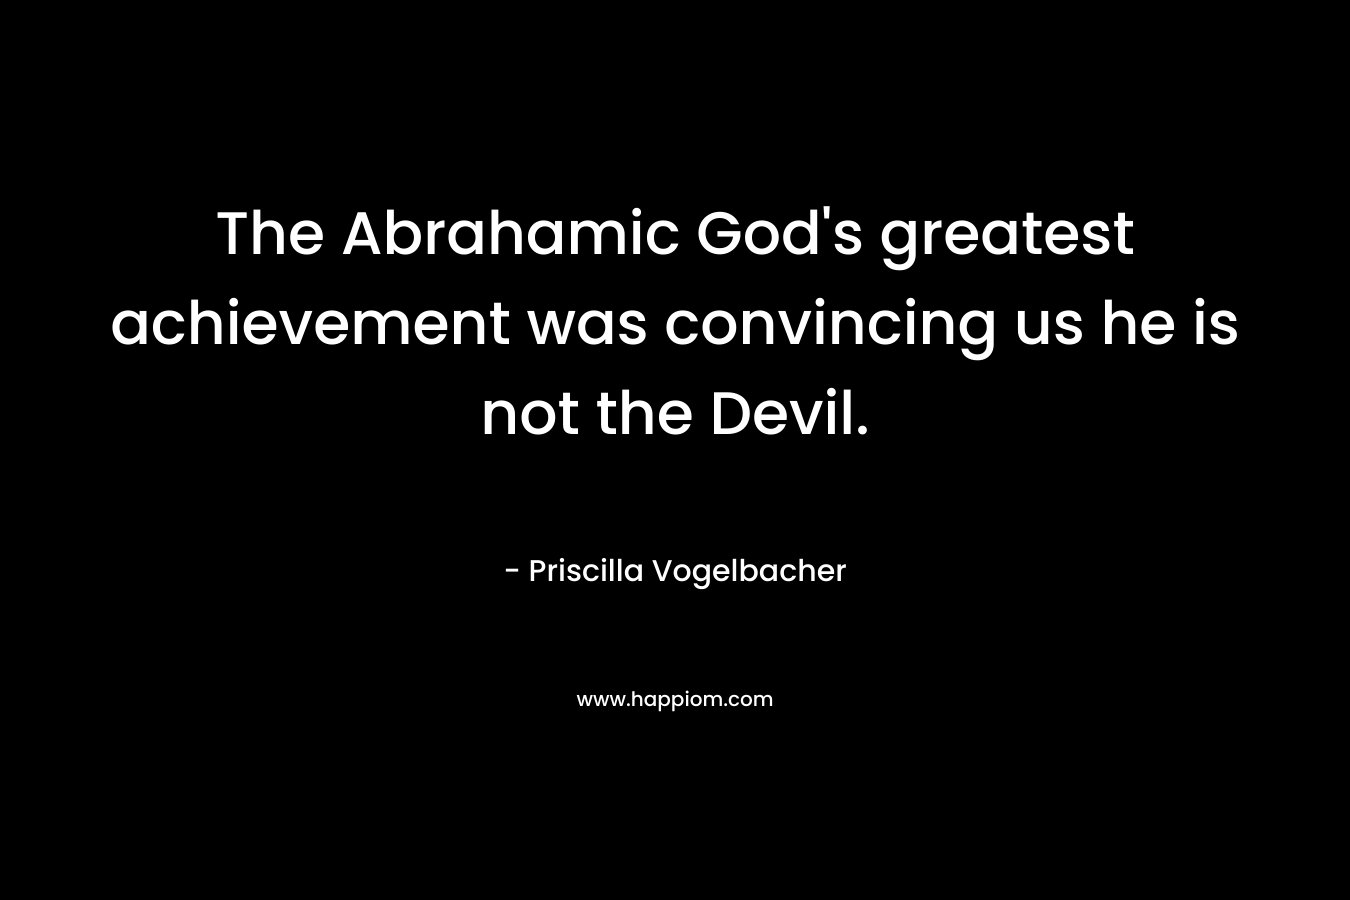 The Abrahamic God's greatest achievement was convincing us he is not the Devil.